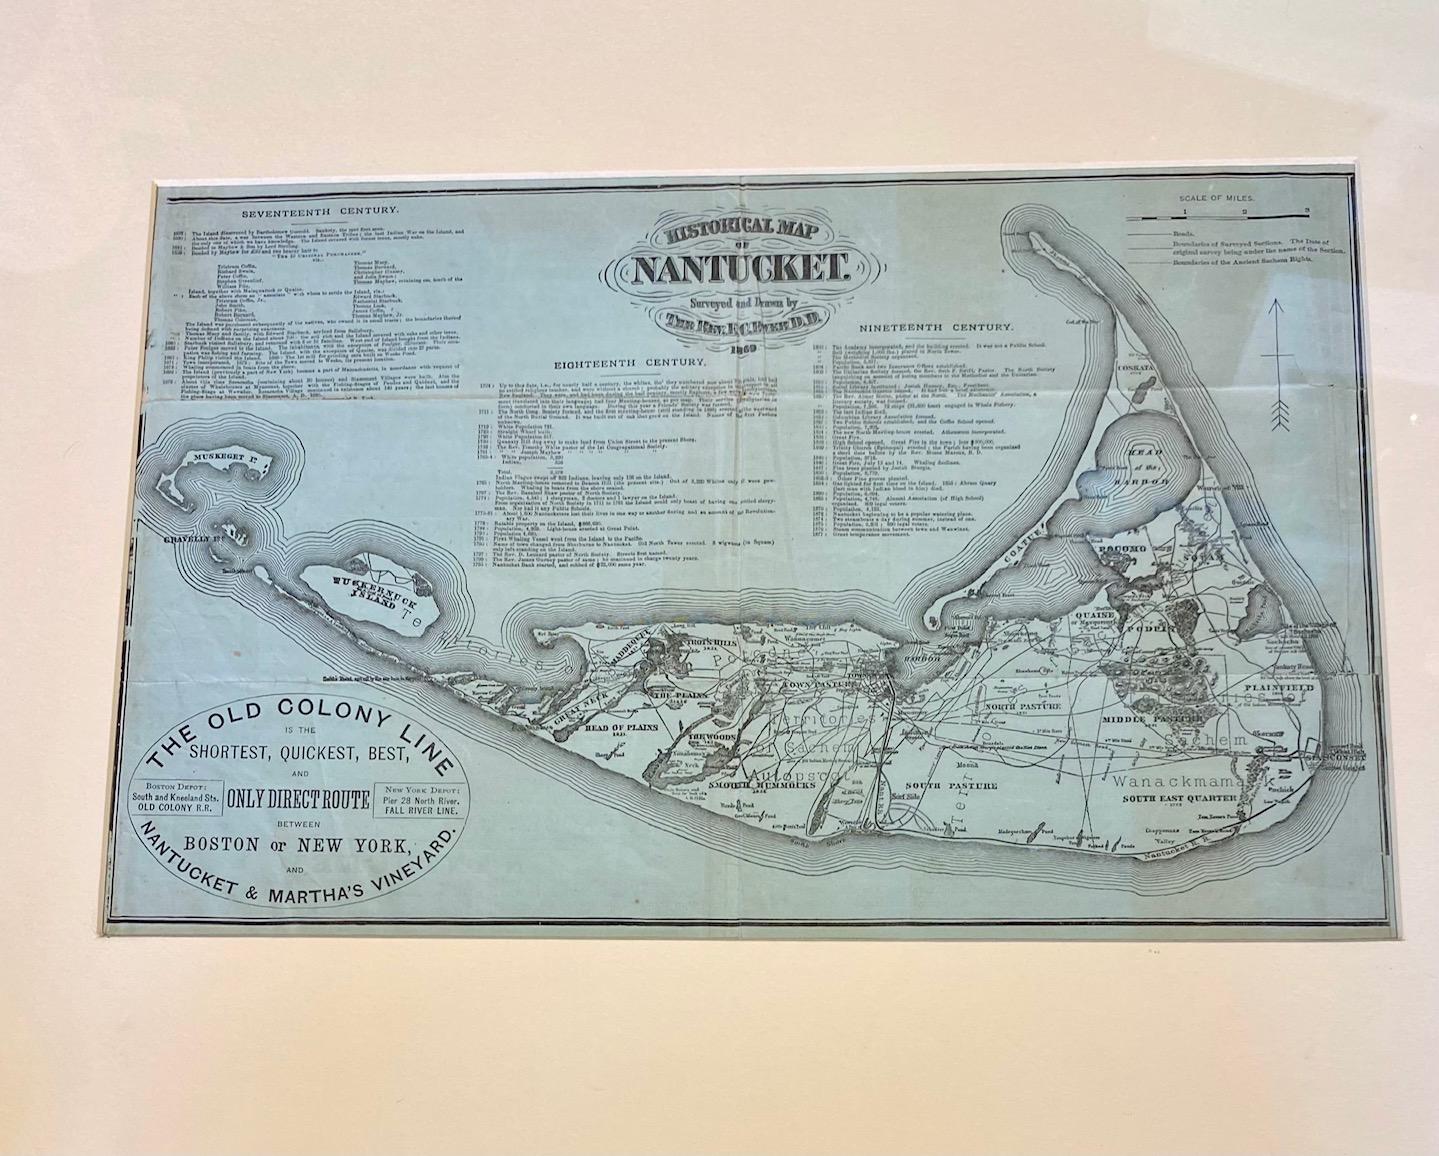 19th century Nantucket map by Rev, Ewer, circa 1886, a small version of Ewer's celebrated 1869 original wall chart, done here for The Old Colony Line Railroads and Steamers connecting Boston and New York directly with Nantucket in the late 1800s.